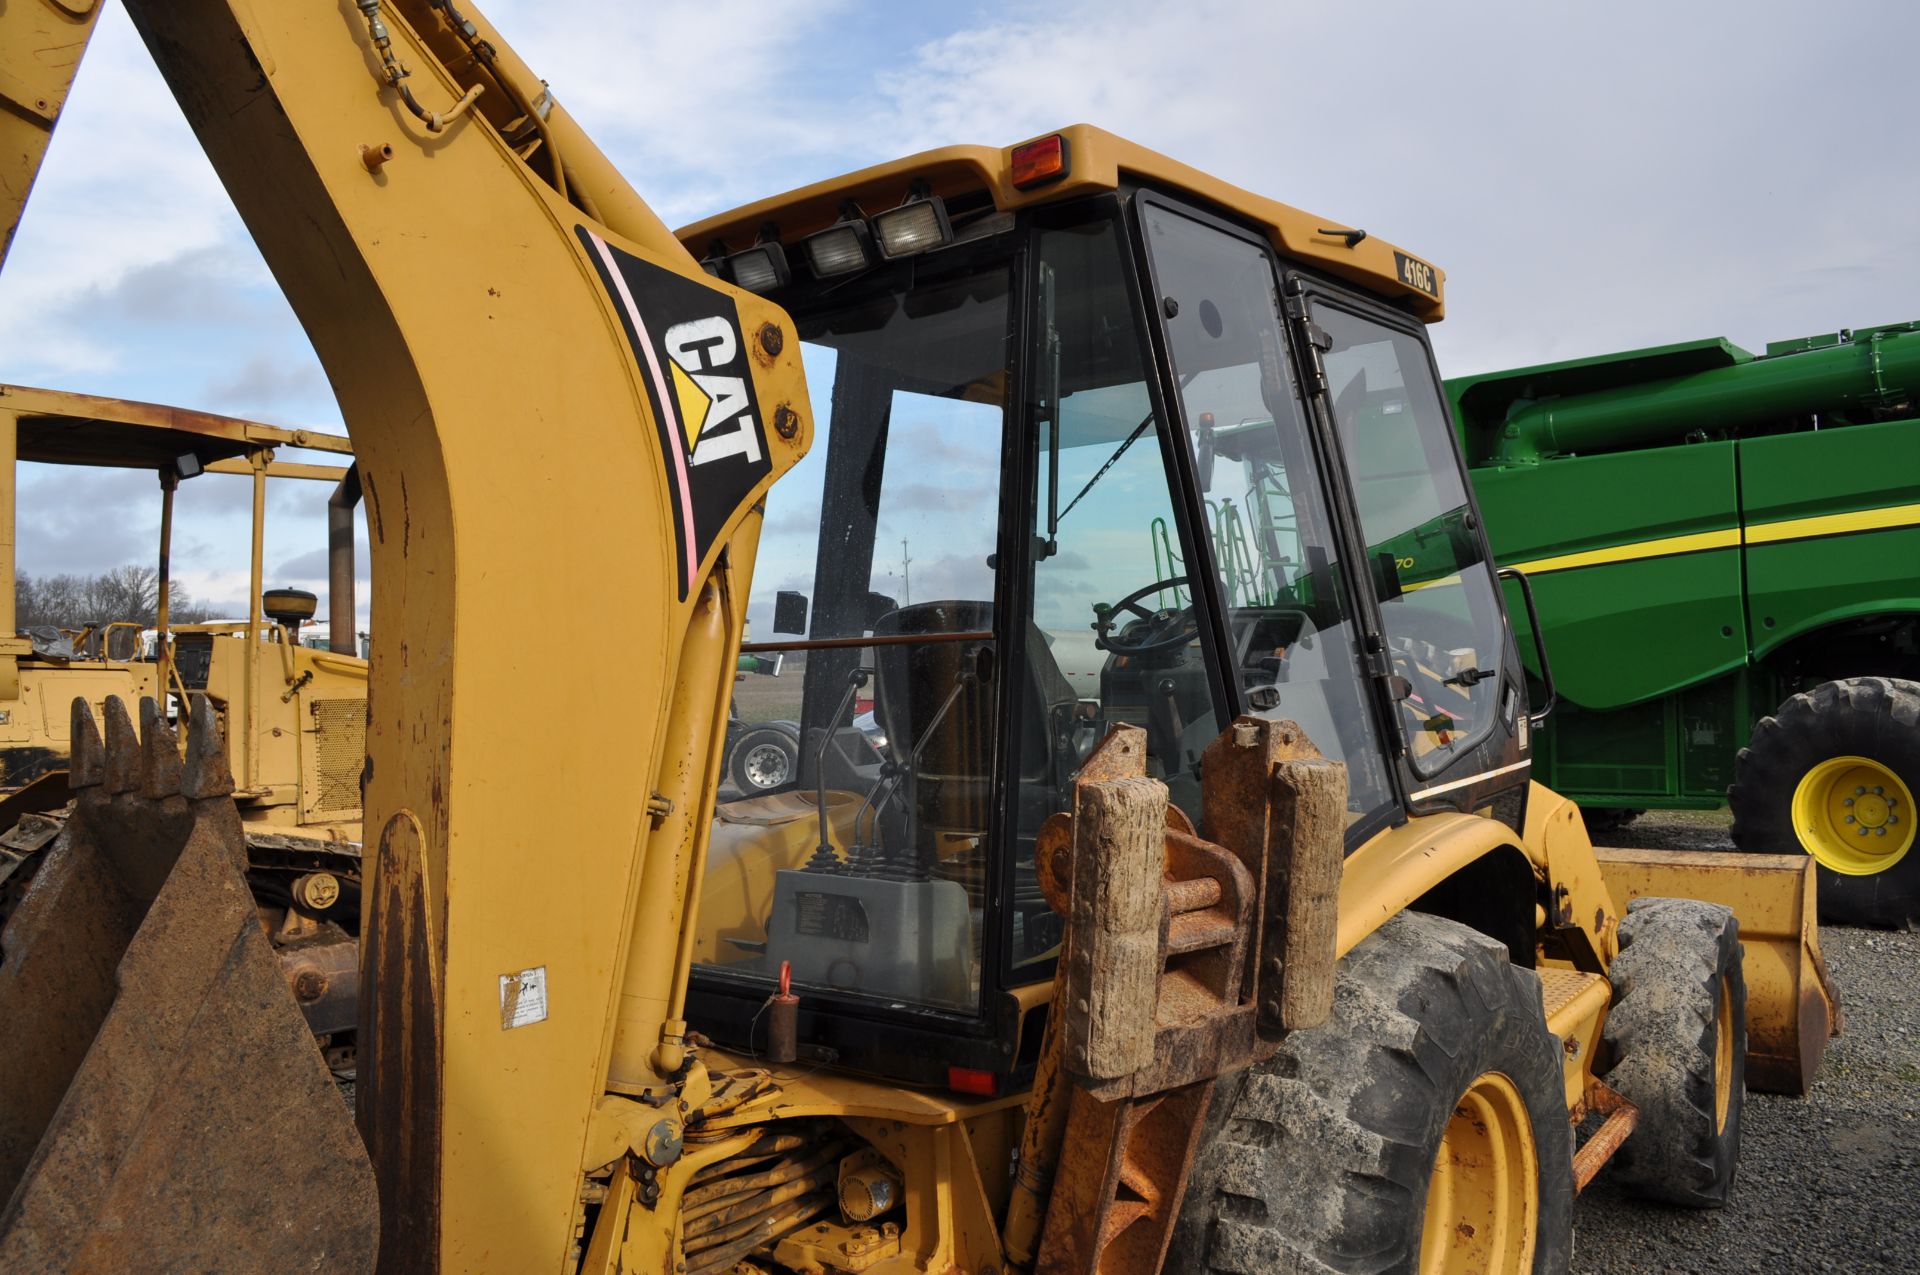 CAT 416C backhoe, 88” bucket, 19.5-24 rear, 12.5/80-18 front, 4x4, 18” and 24” digging buckets - Image 19 of 35